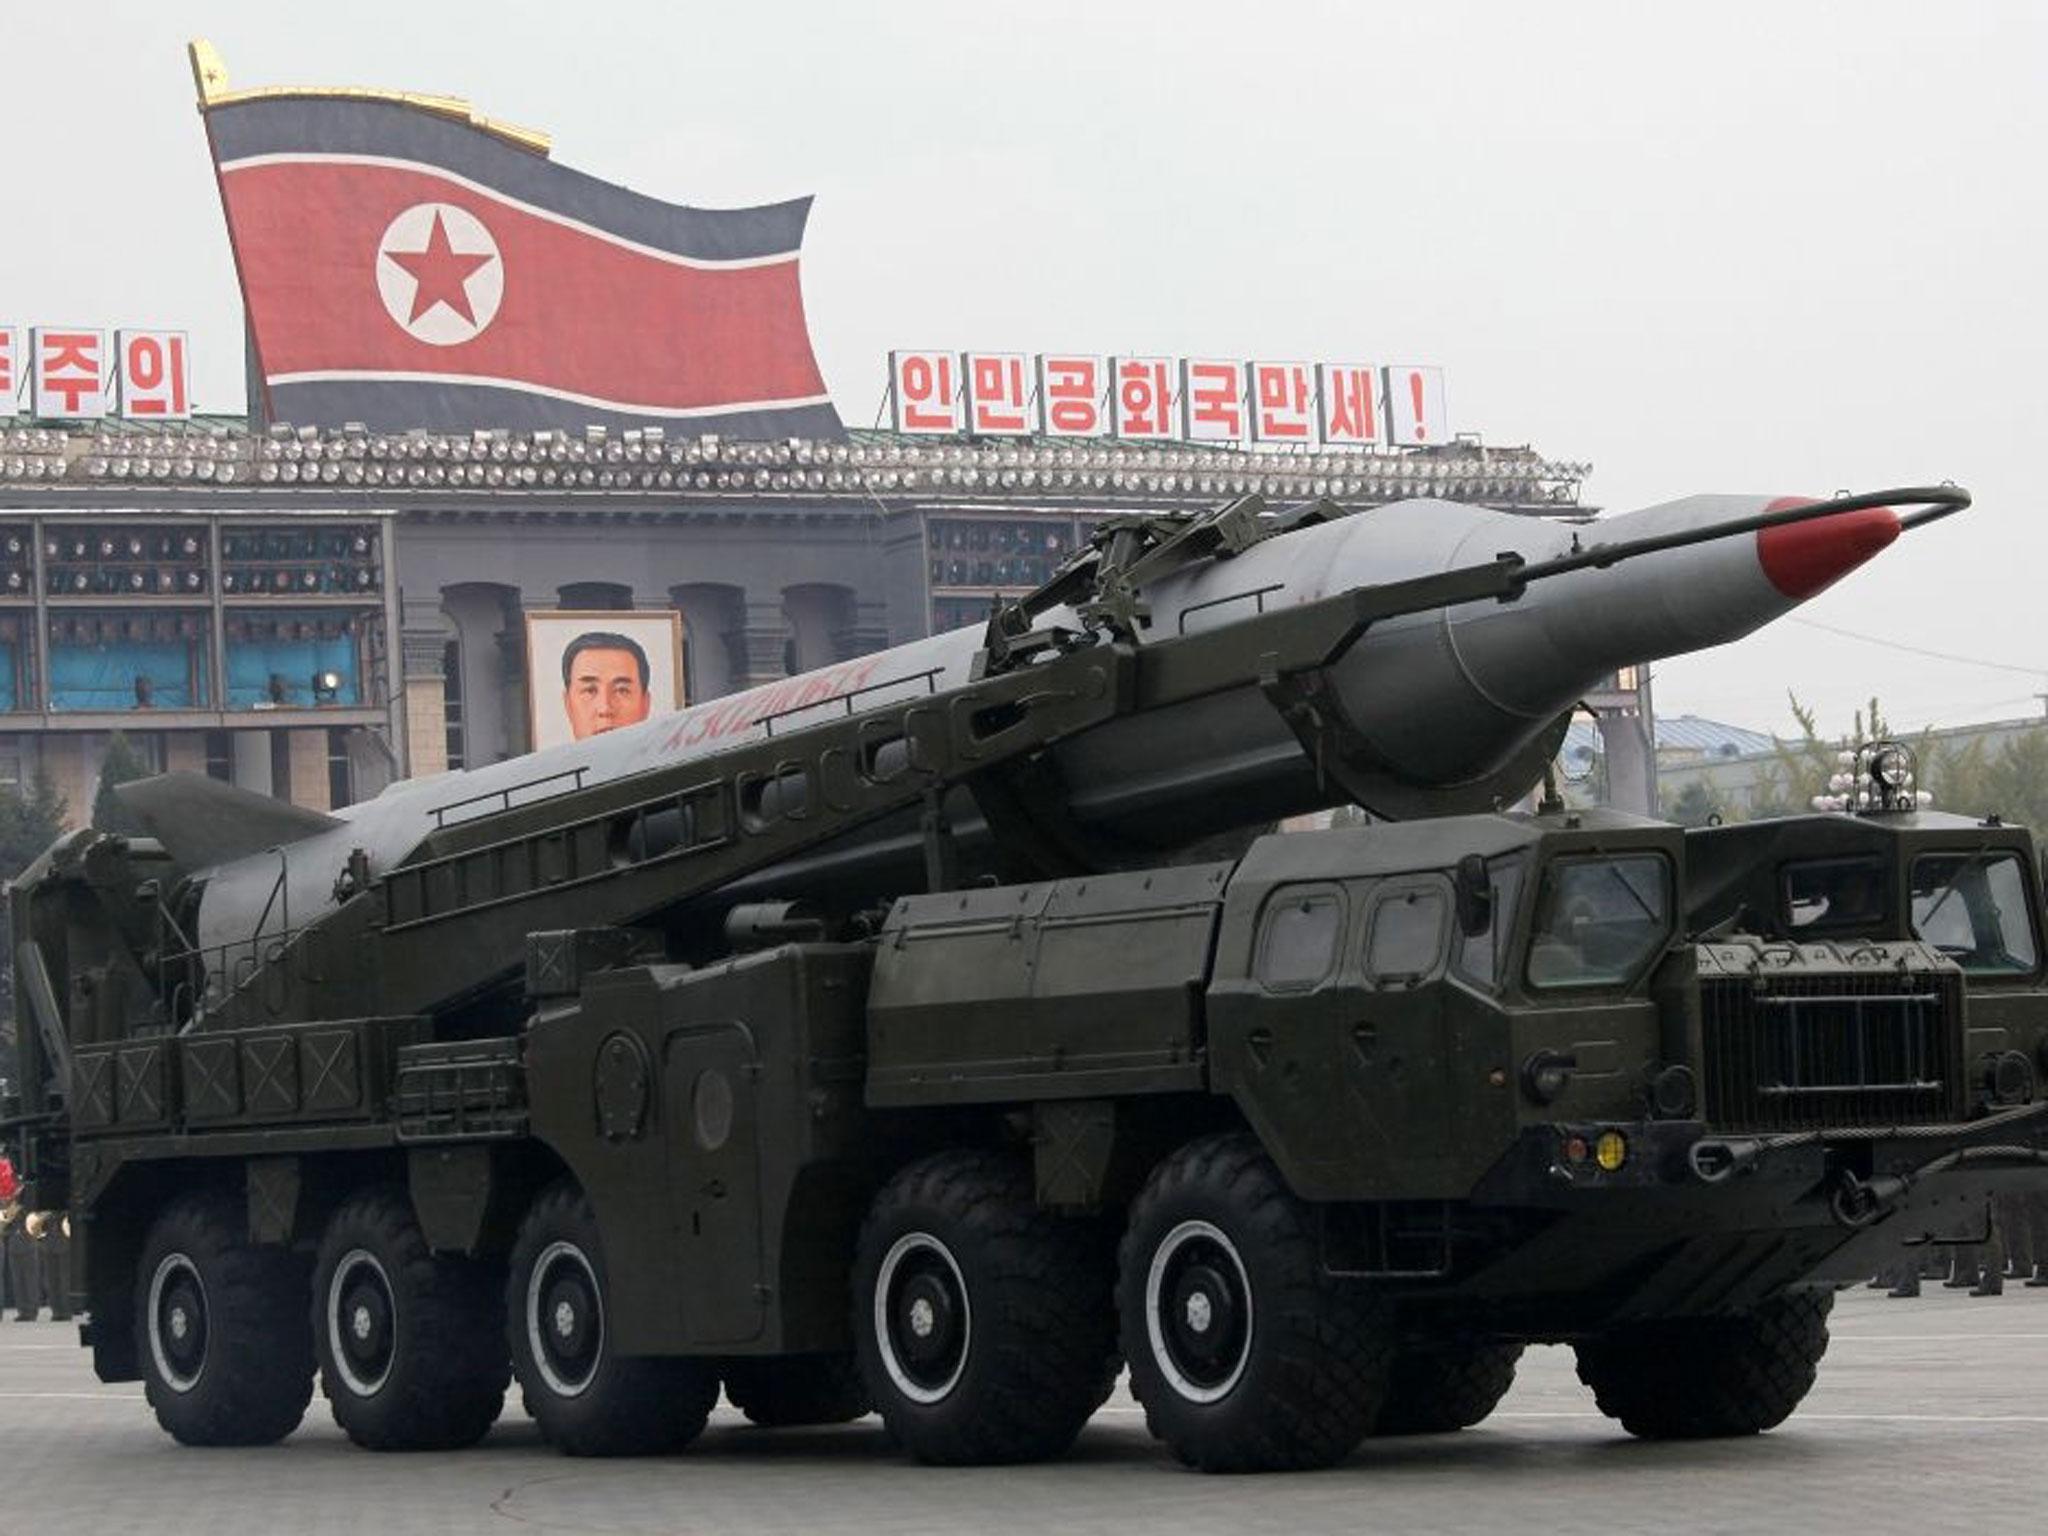 North Korea missiles on trucks make its way during a massive military parade to mark the 65th anniversary of the communist nation's ruling Workers' Party in Pyongyang, North Korea. Nuclear-armed North Korea has hundreds of ballistic missiles that can targ